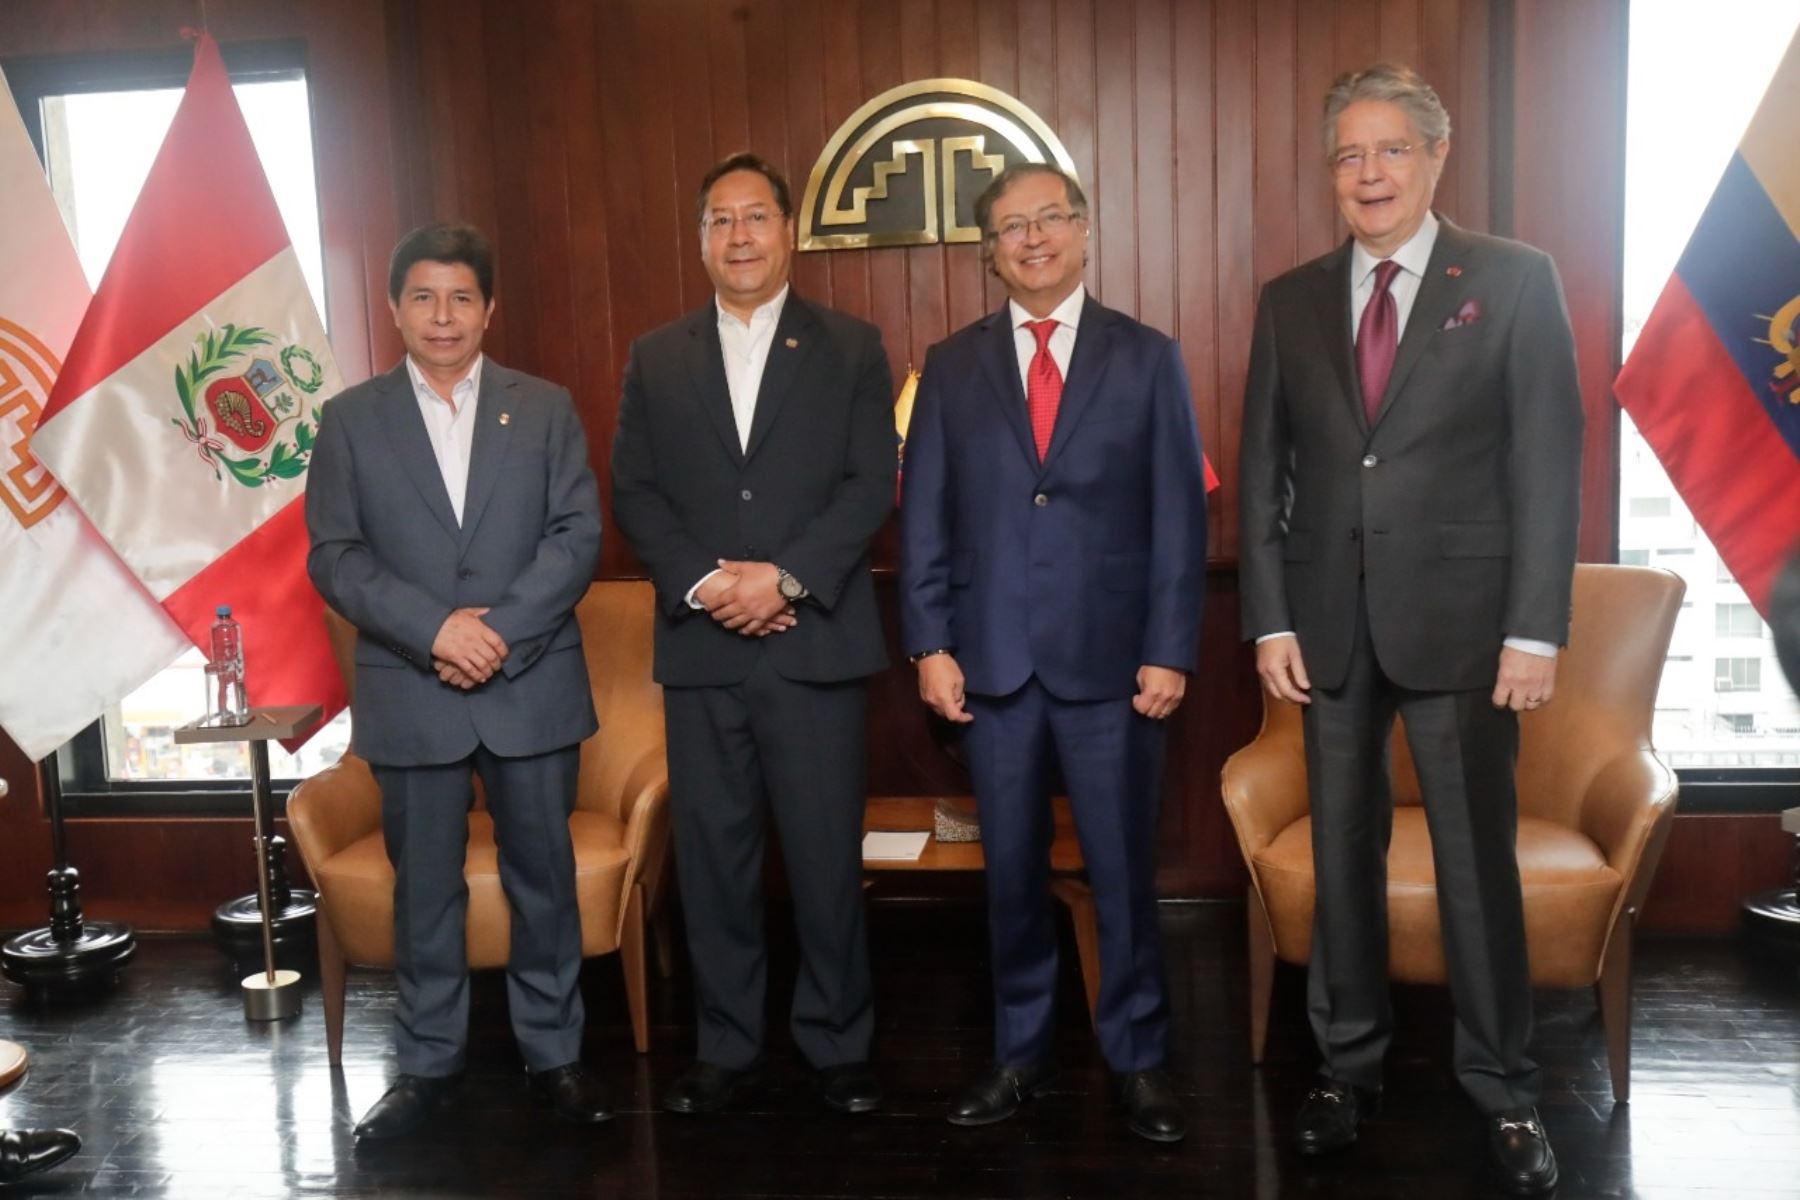 Peruvian President meets with counterparts from Ecuador, Bolivia, and ...